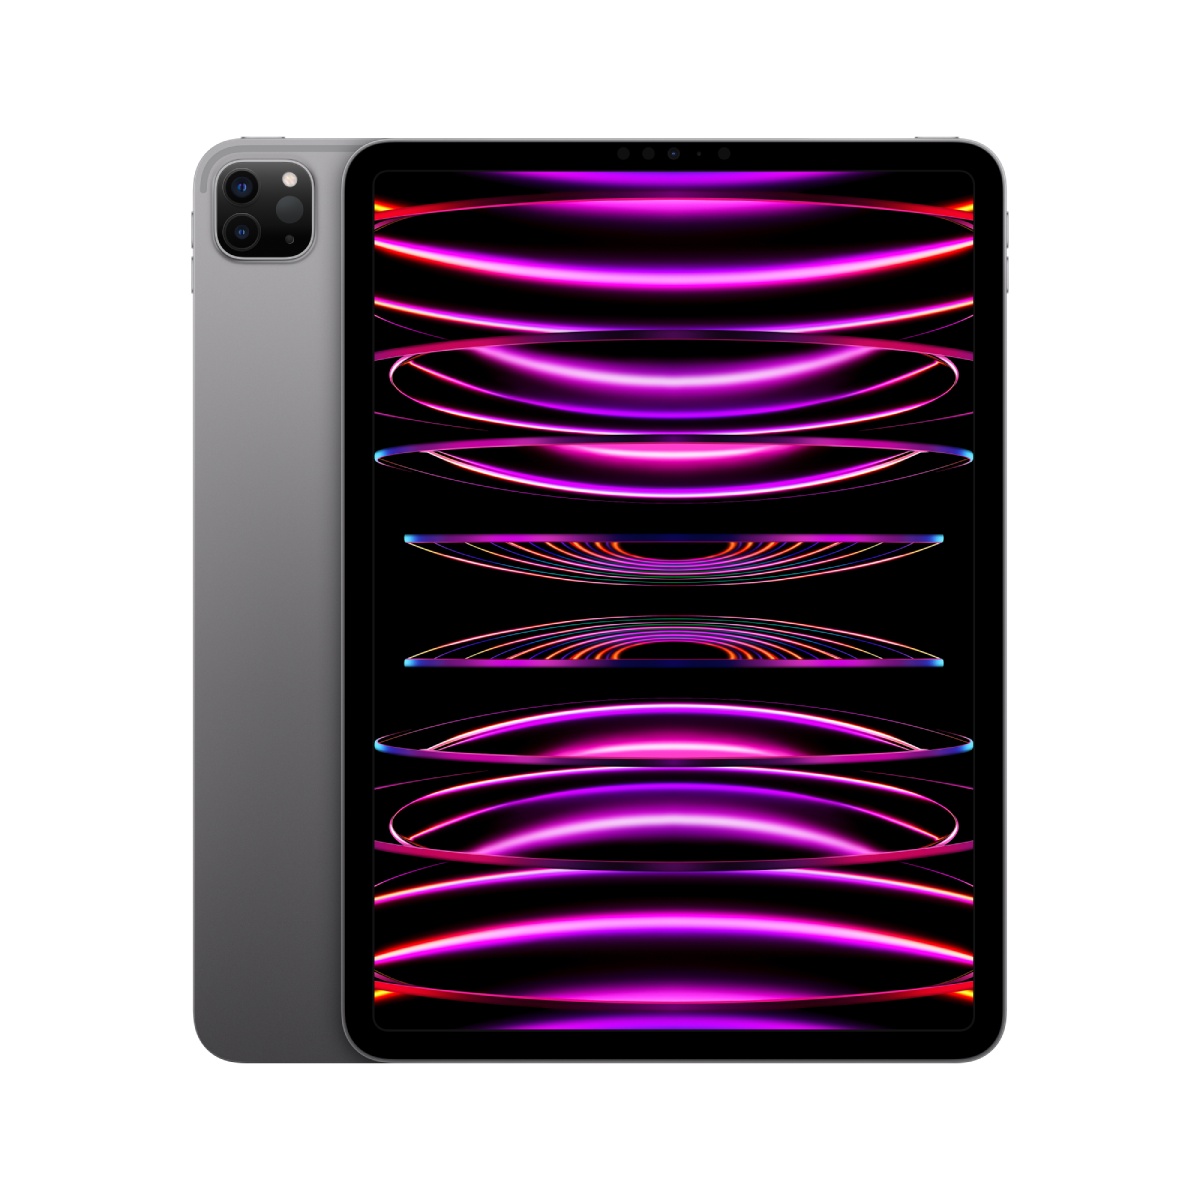 11-inch iPad Pro (4th Gen) Wi-Fi, , large image number 0